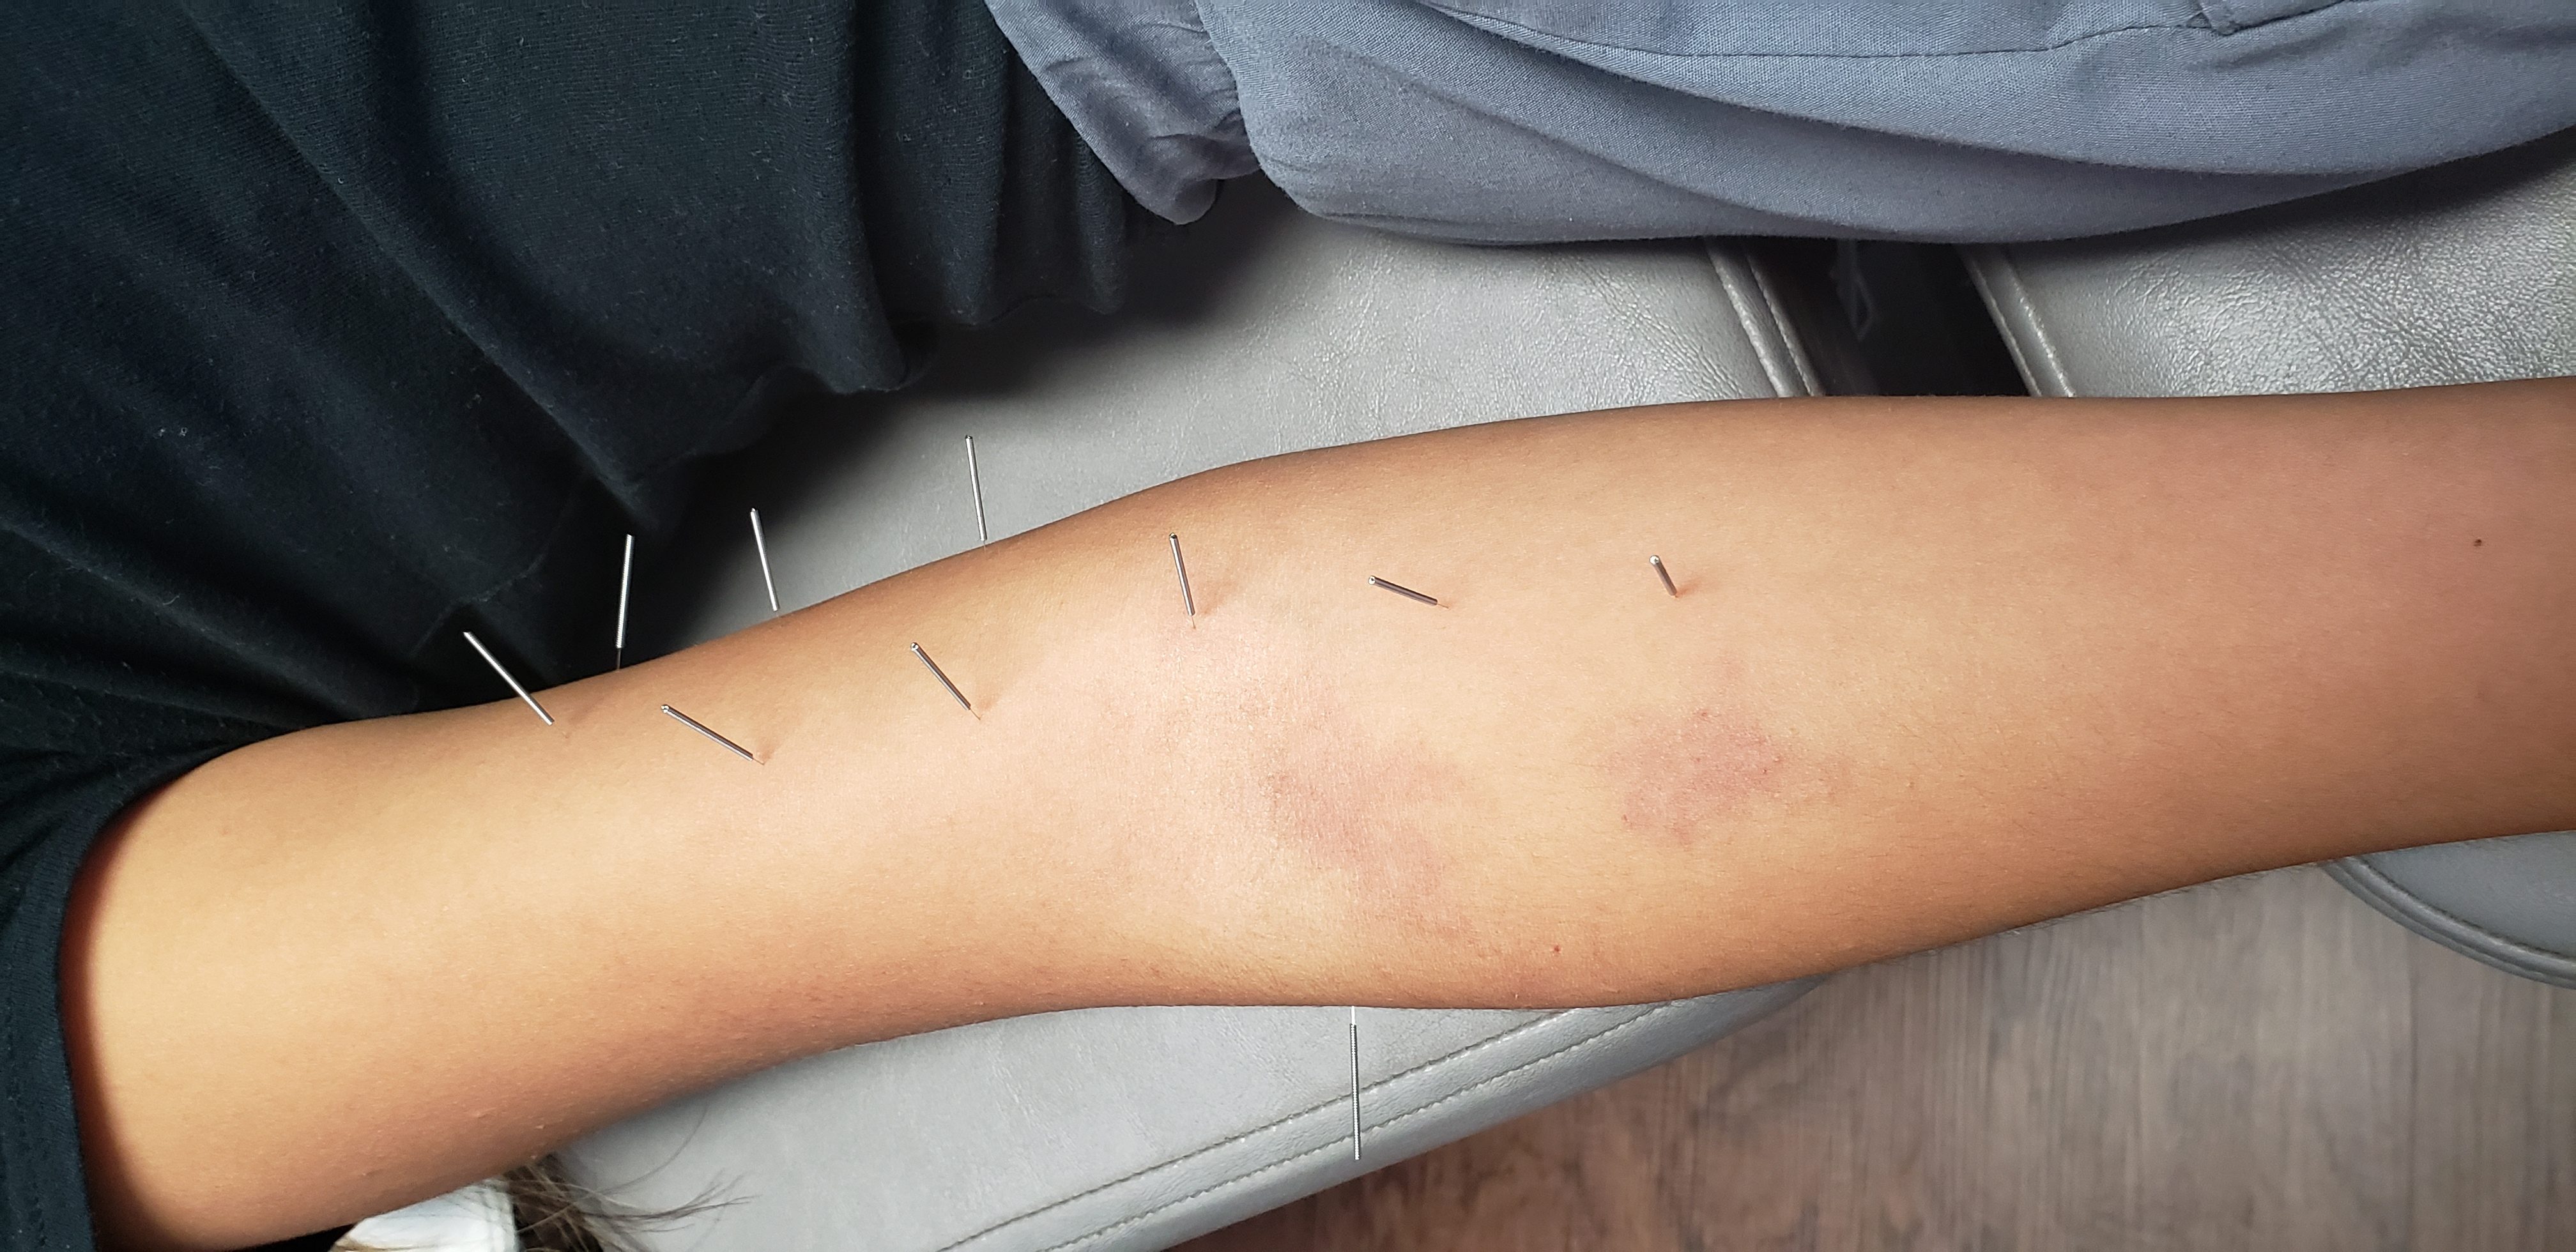 5 Dry Needling Benefits For Quick Pain Relief - Synergy Chiropractic of  Houston